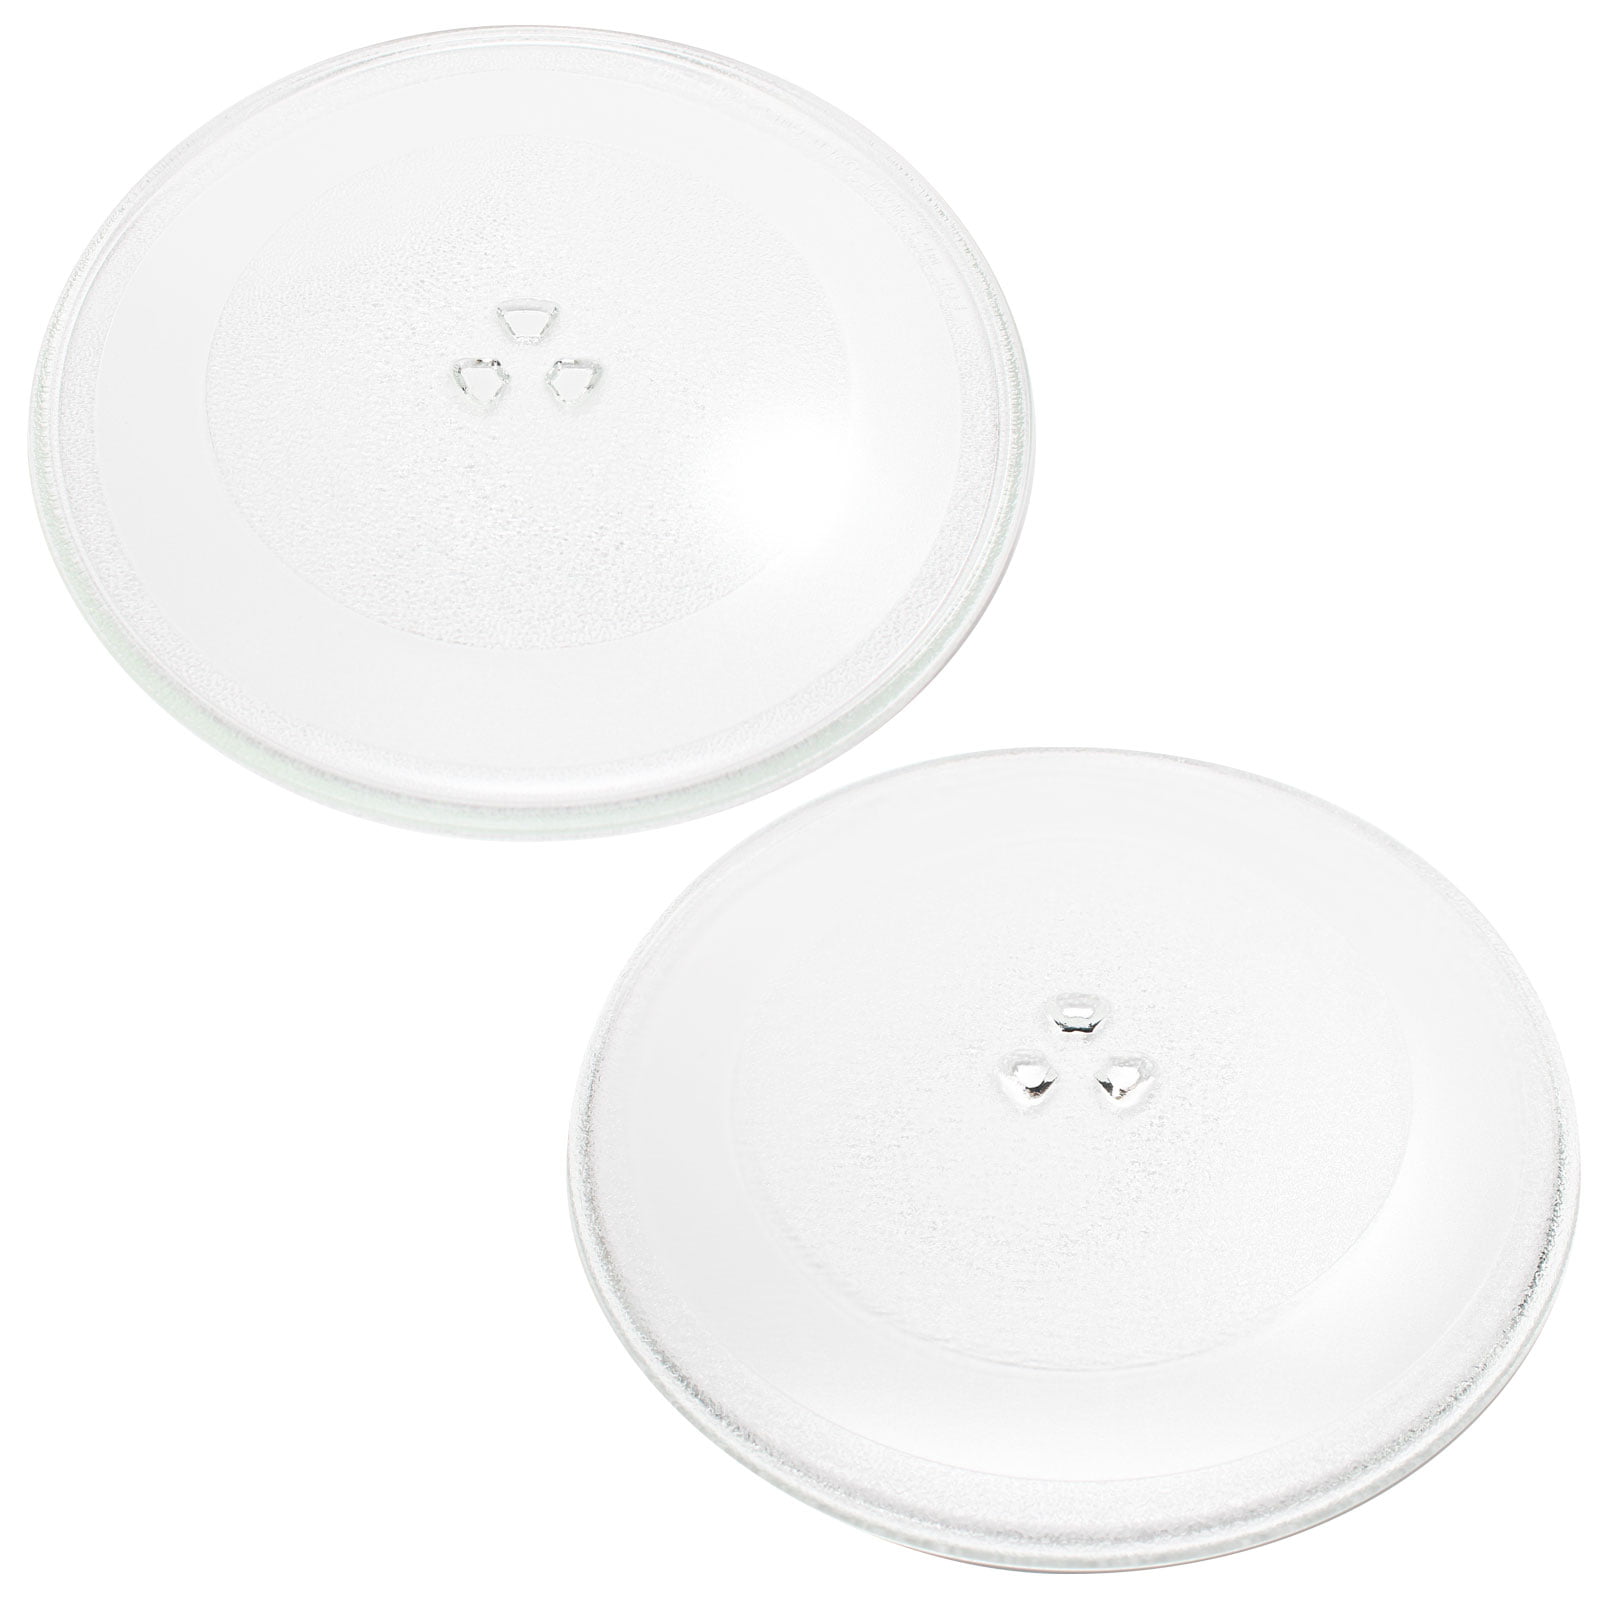 2-Pack Replacement 1B71961 Microwave Turntable Glass Plate for LG, G.E